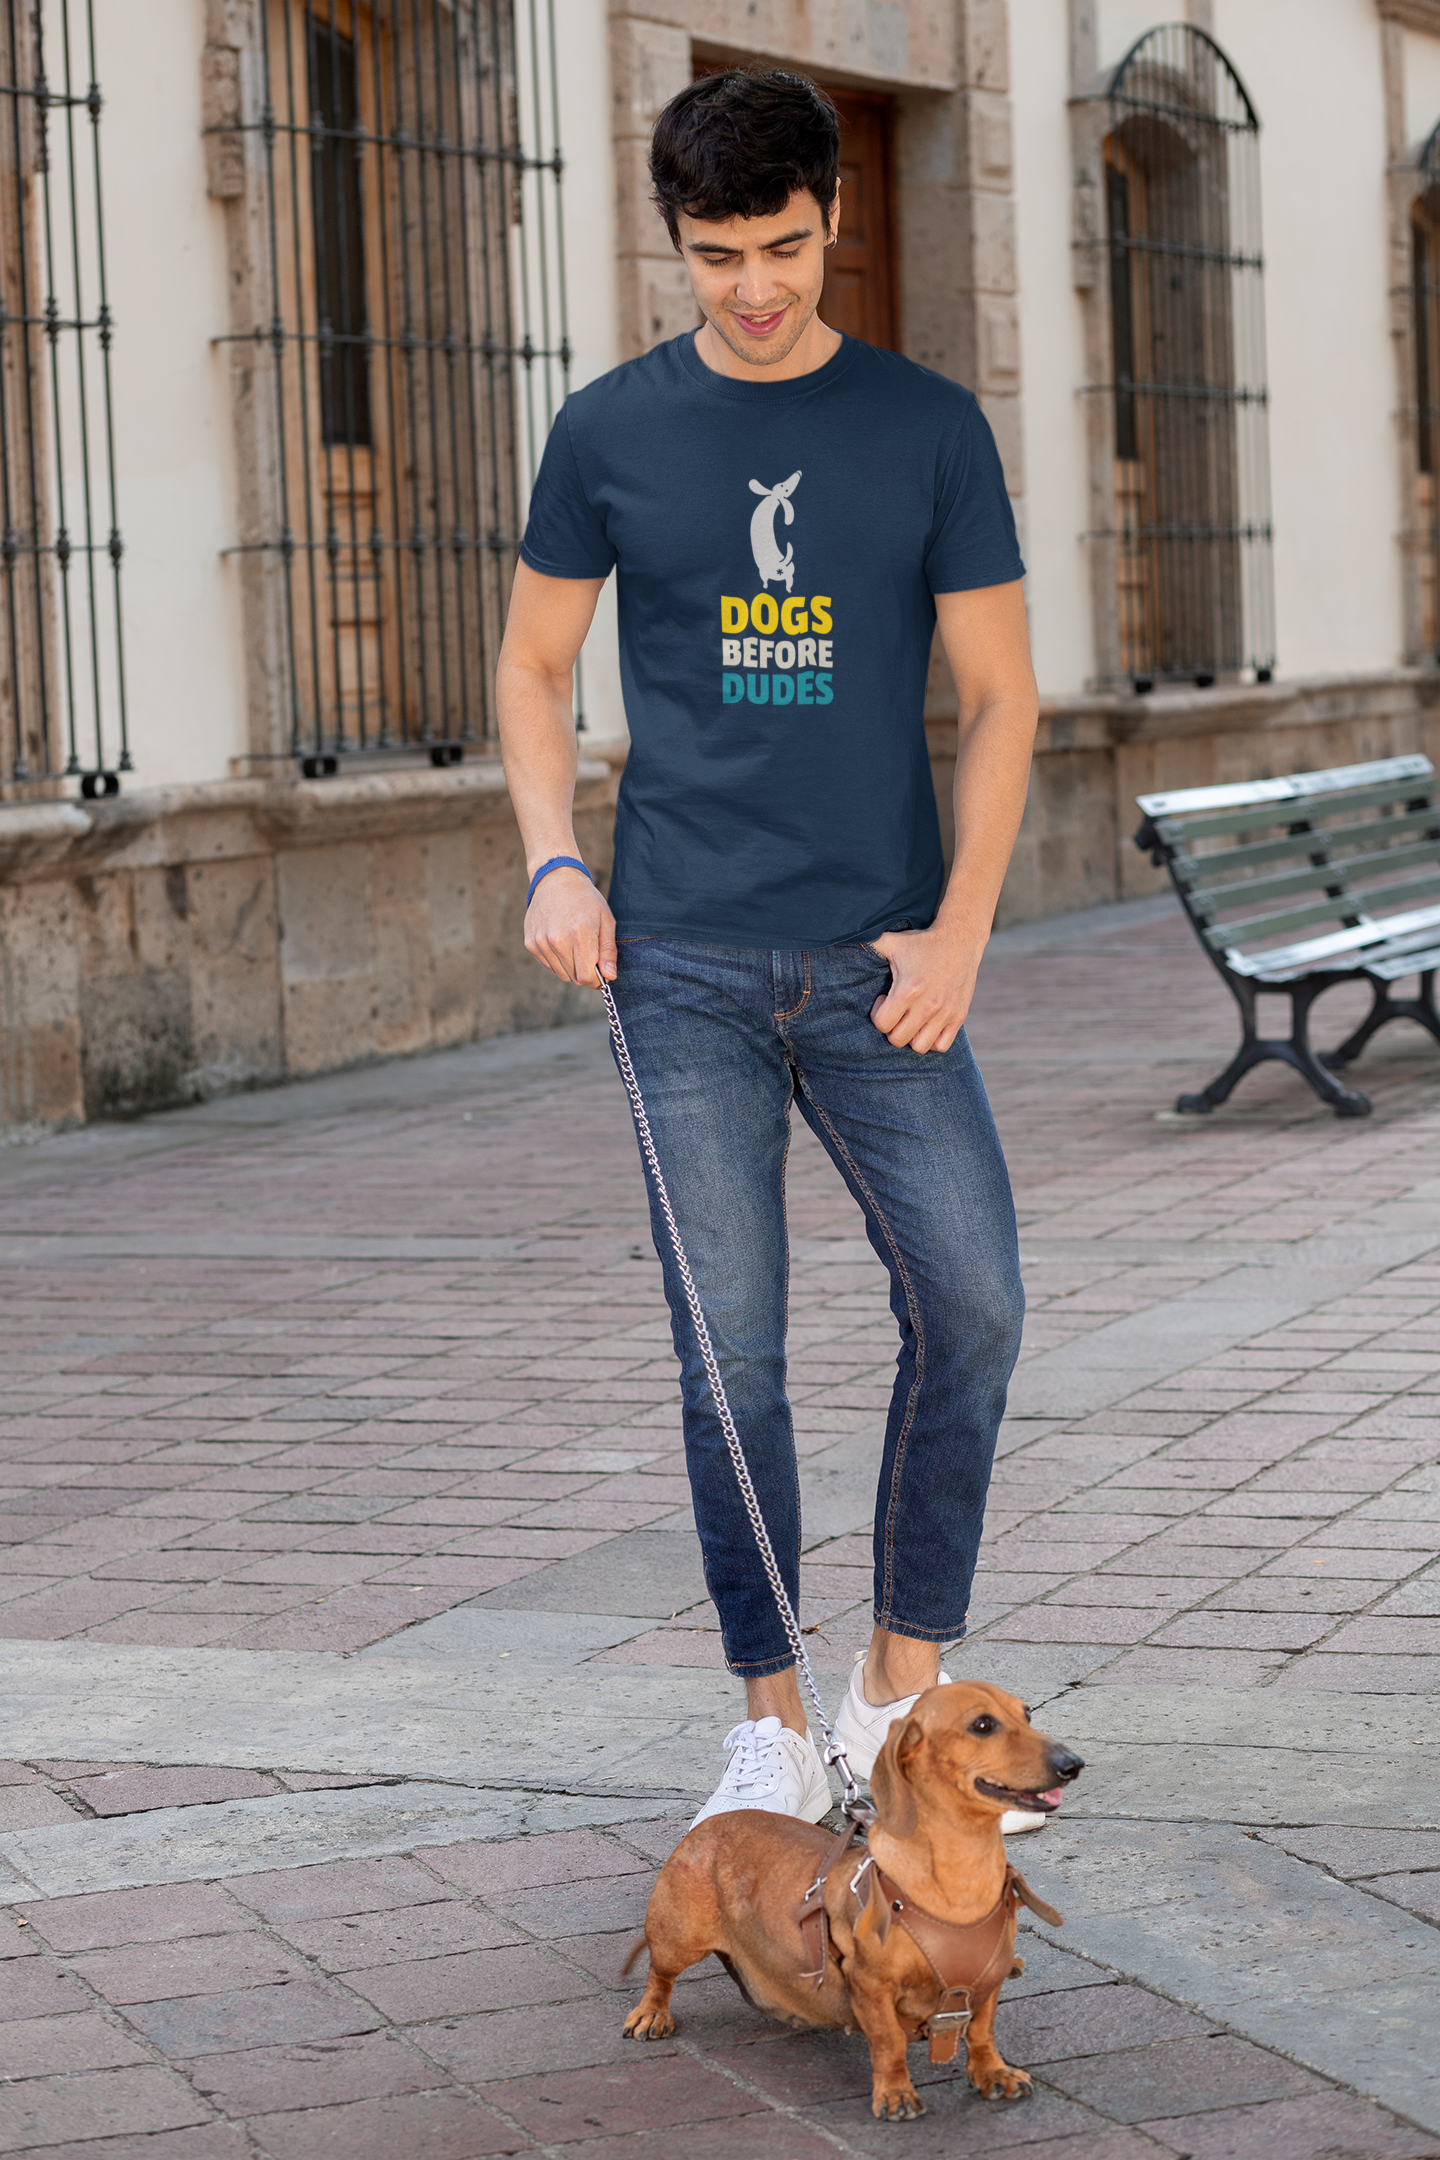 "DOGS BEFORE DUDES " - HALF-SLEEVE T-SHIRTS NAVY BLUE